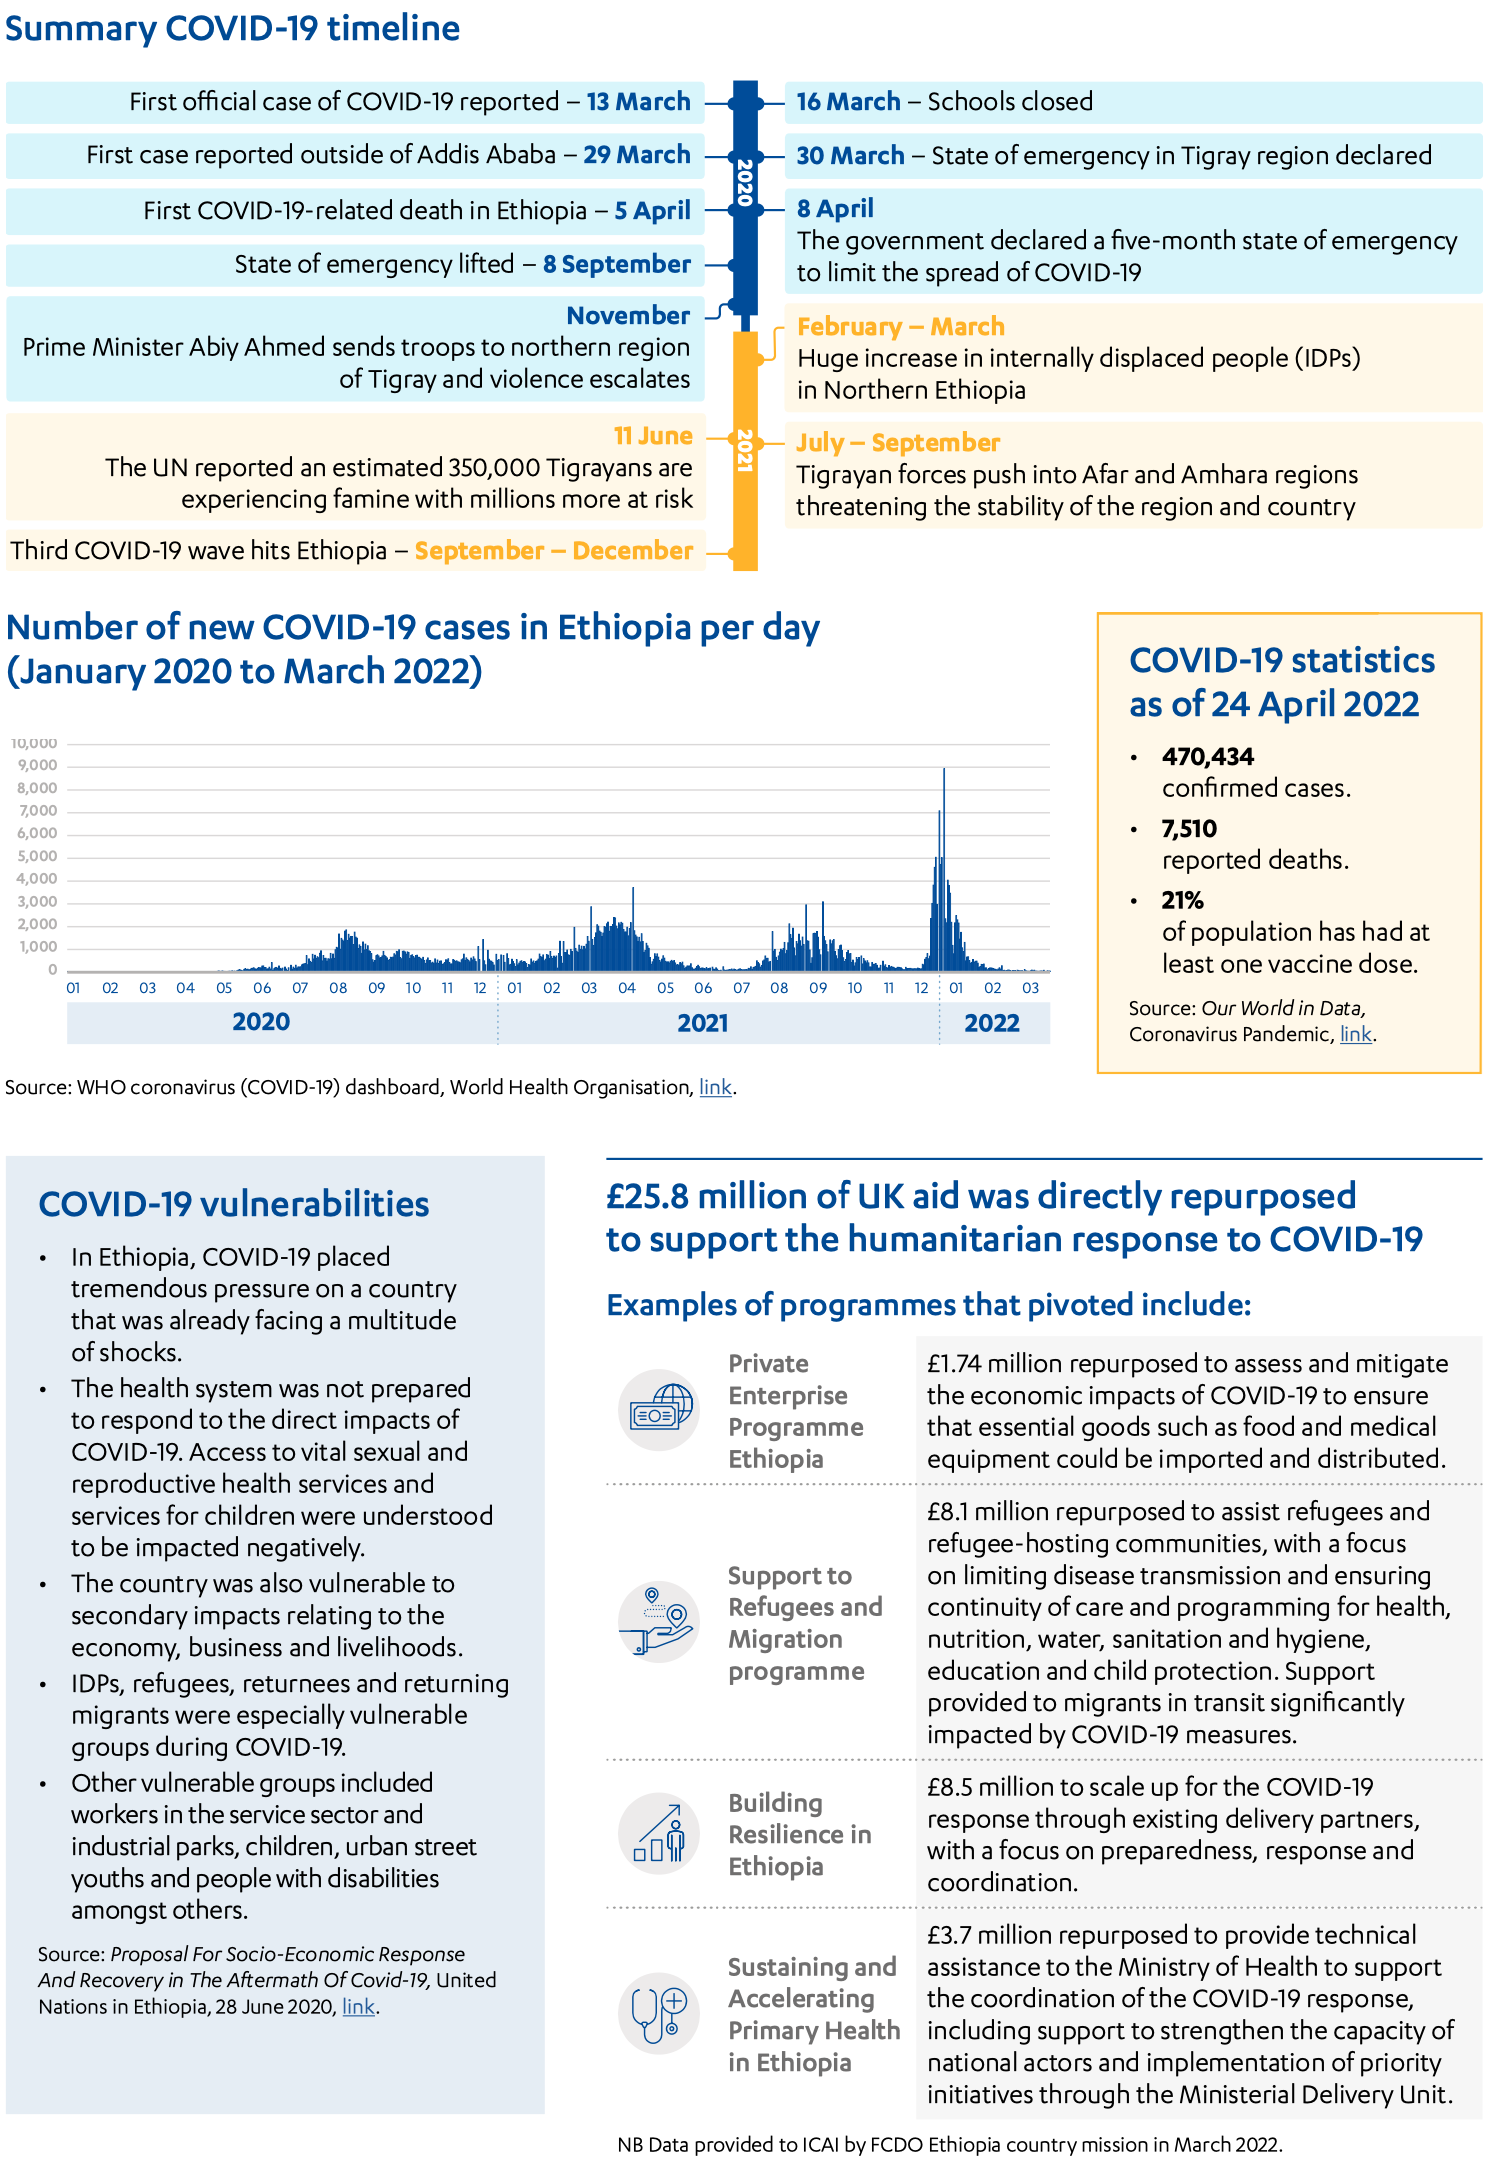 Ethiopia case study, including Summary COVID-19 timeline, COVID-19 statistics, COVID-19 vulnerabilities and examples of UK aid repurposed to support the humanitarian response to COVID-19